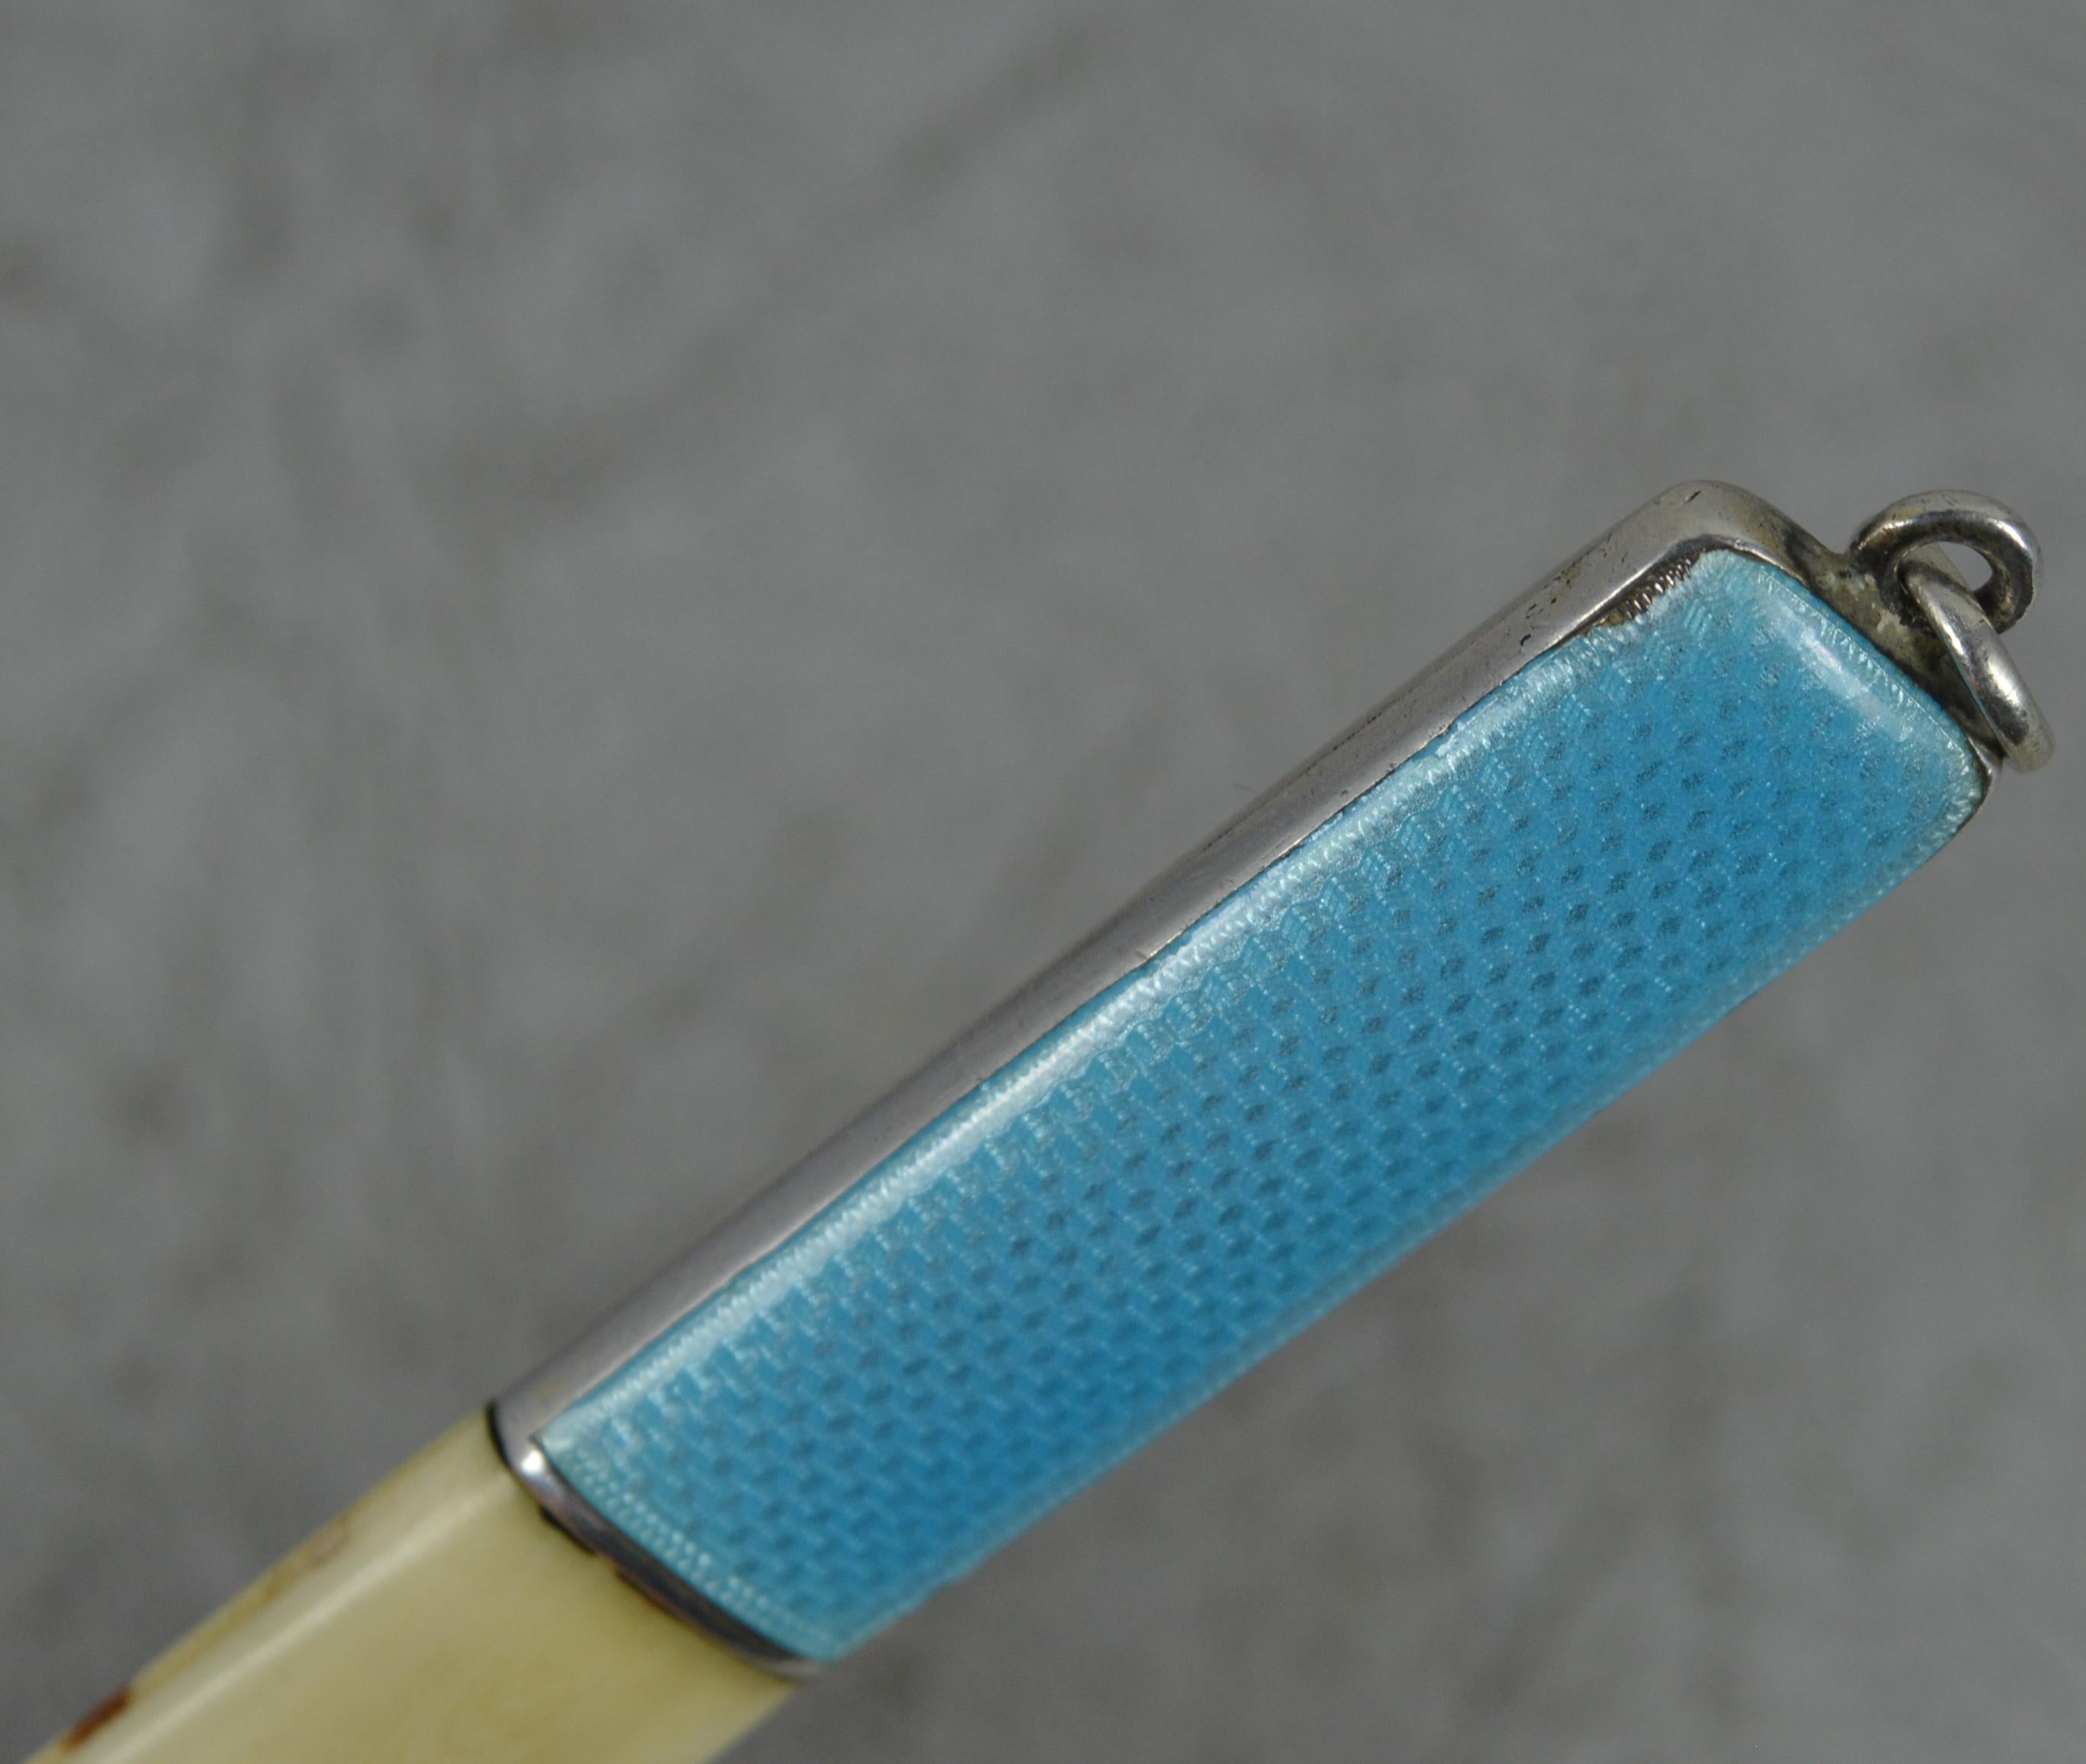 A superb Asprey bookmark and page turner.
Sterling silver top with blue guilloche enamel.
Faux bone turner.
Circa 1920.

Hallmarks ; marks to one side
Size ; 11.5 cm long
Weight ; 14.5 grams
Condition ; Very good for age. Light general marks and